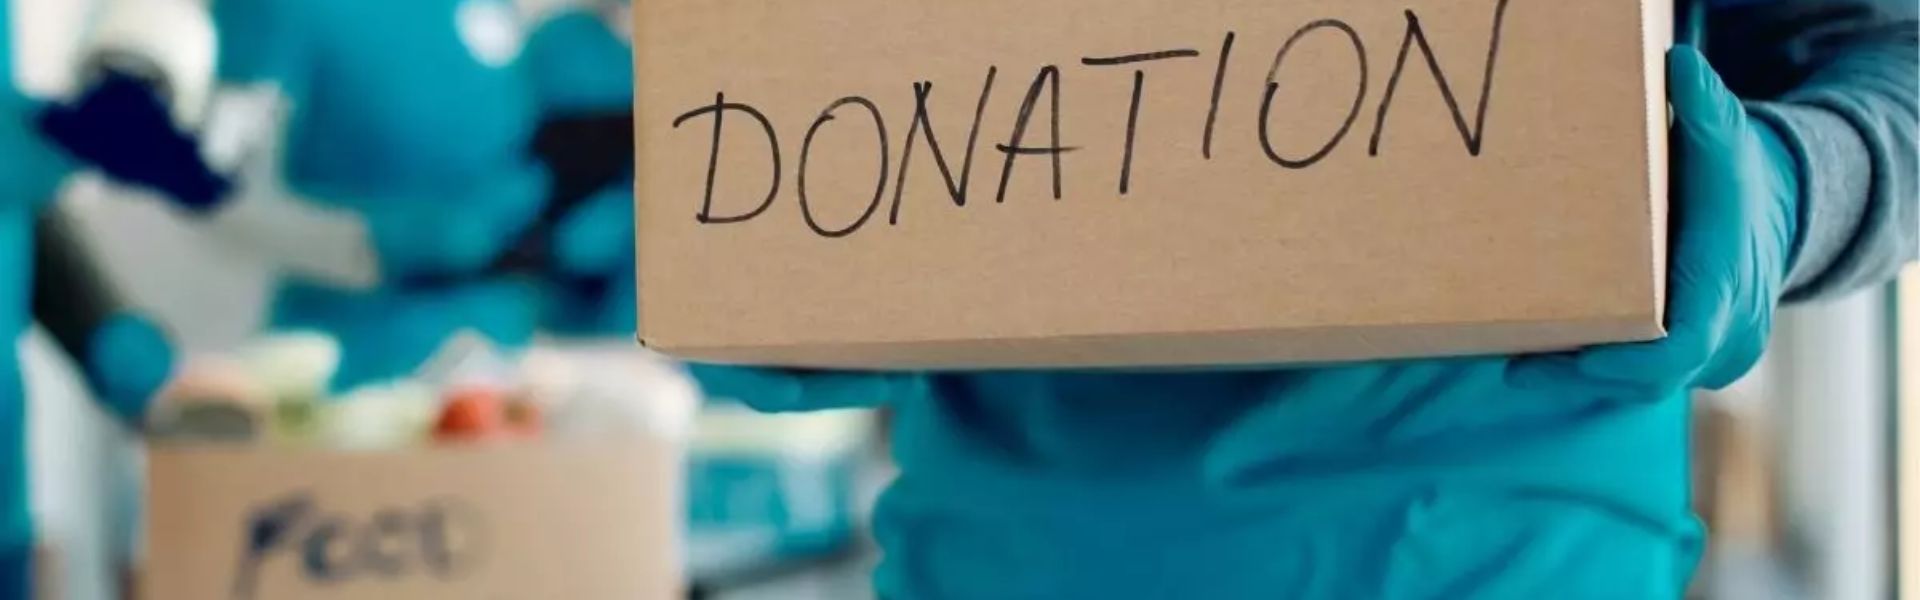 How to Donate to a Women’s Shelter?